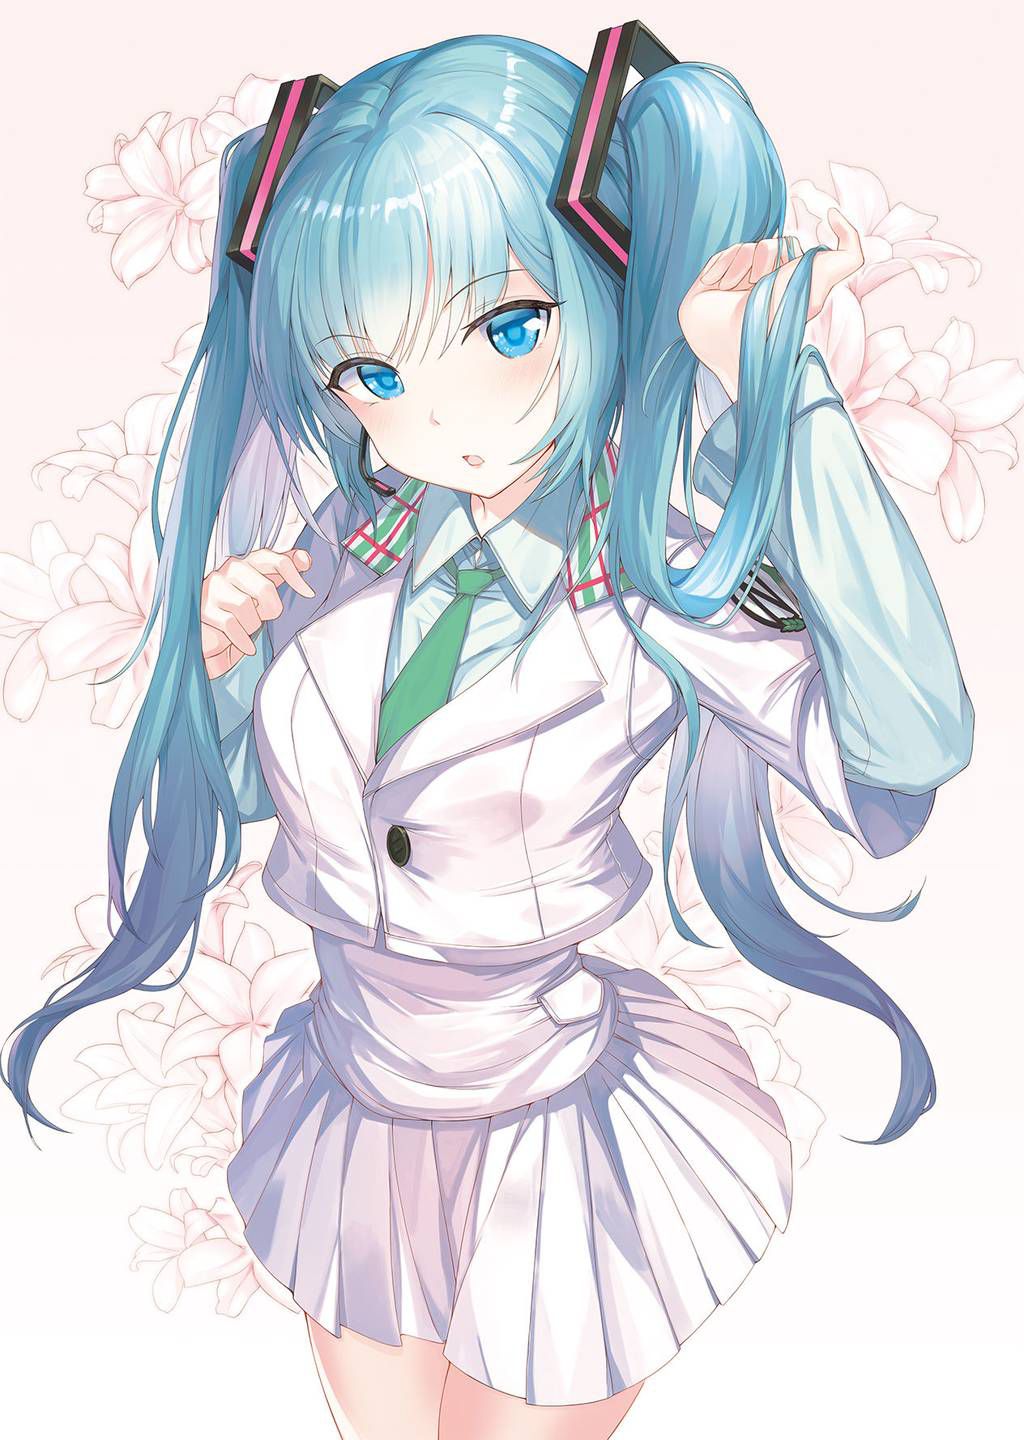 Vocaloid Image that is becoming the Iki face of Hatsune Miku 9